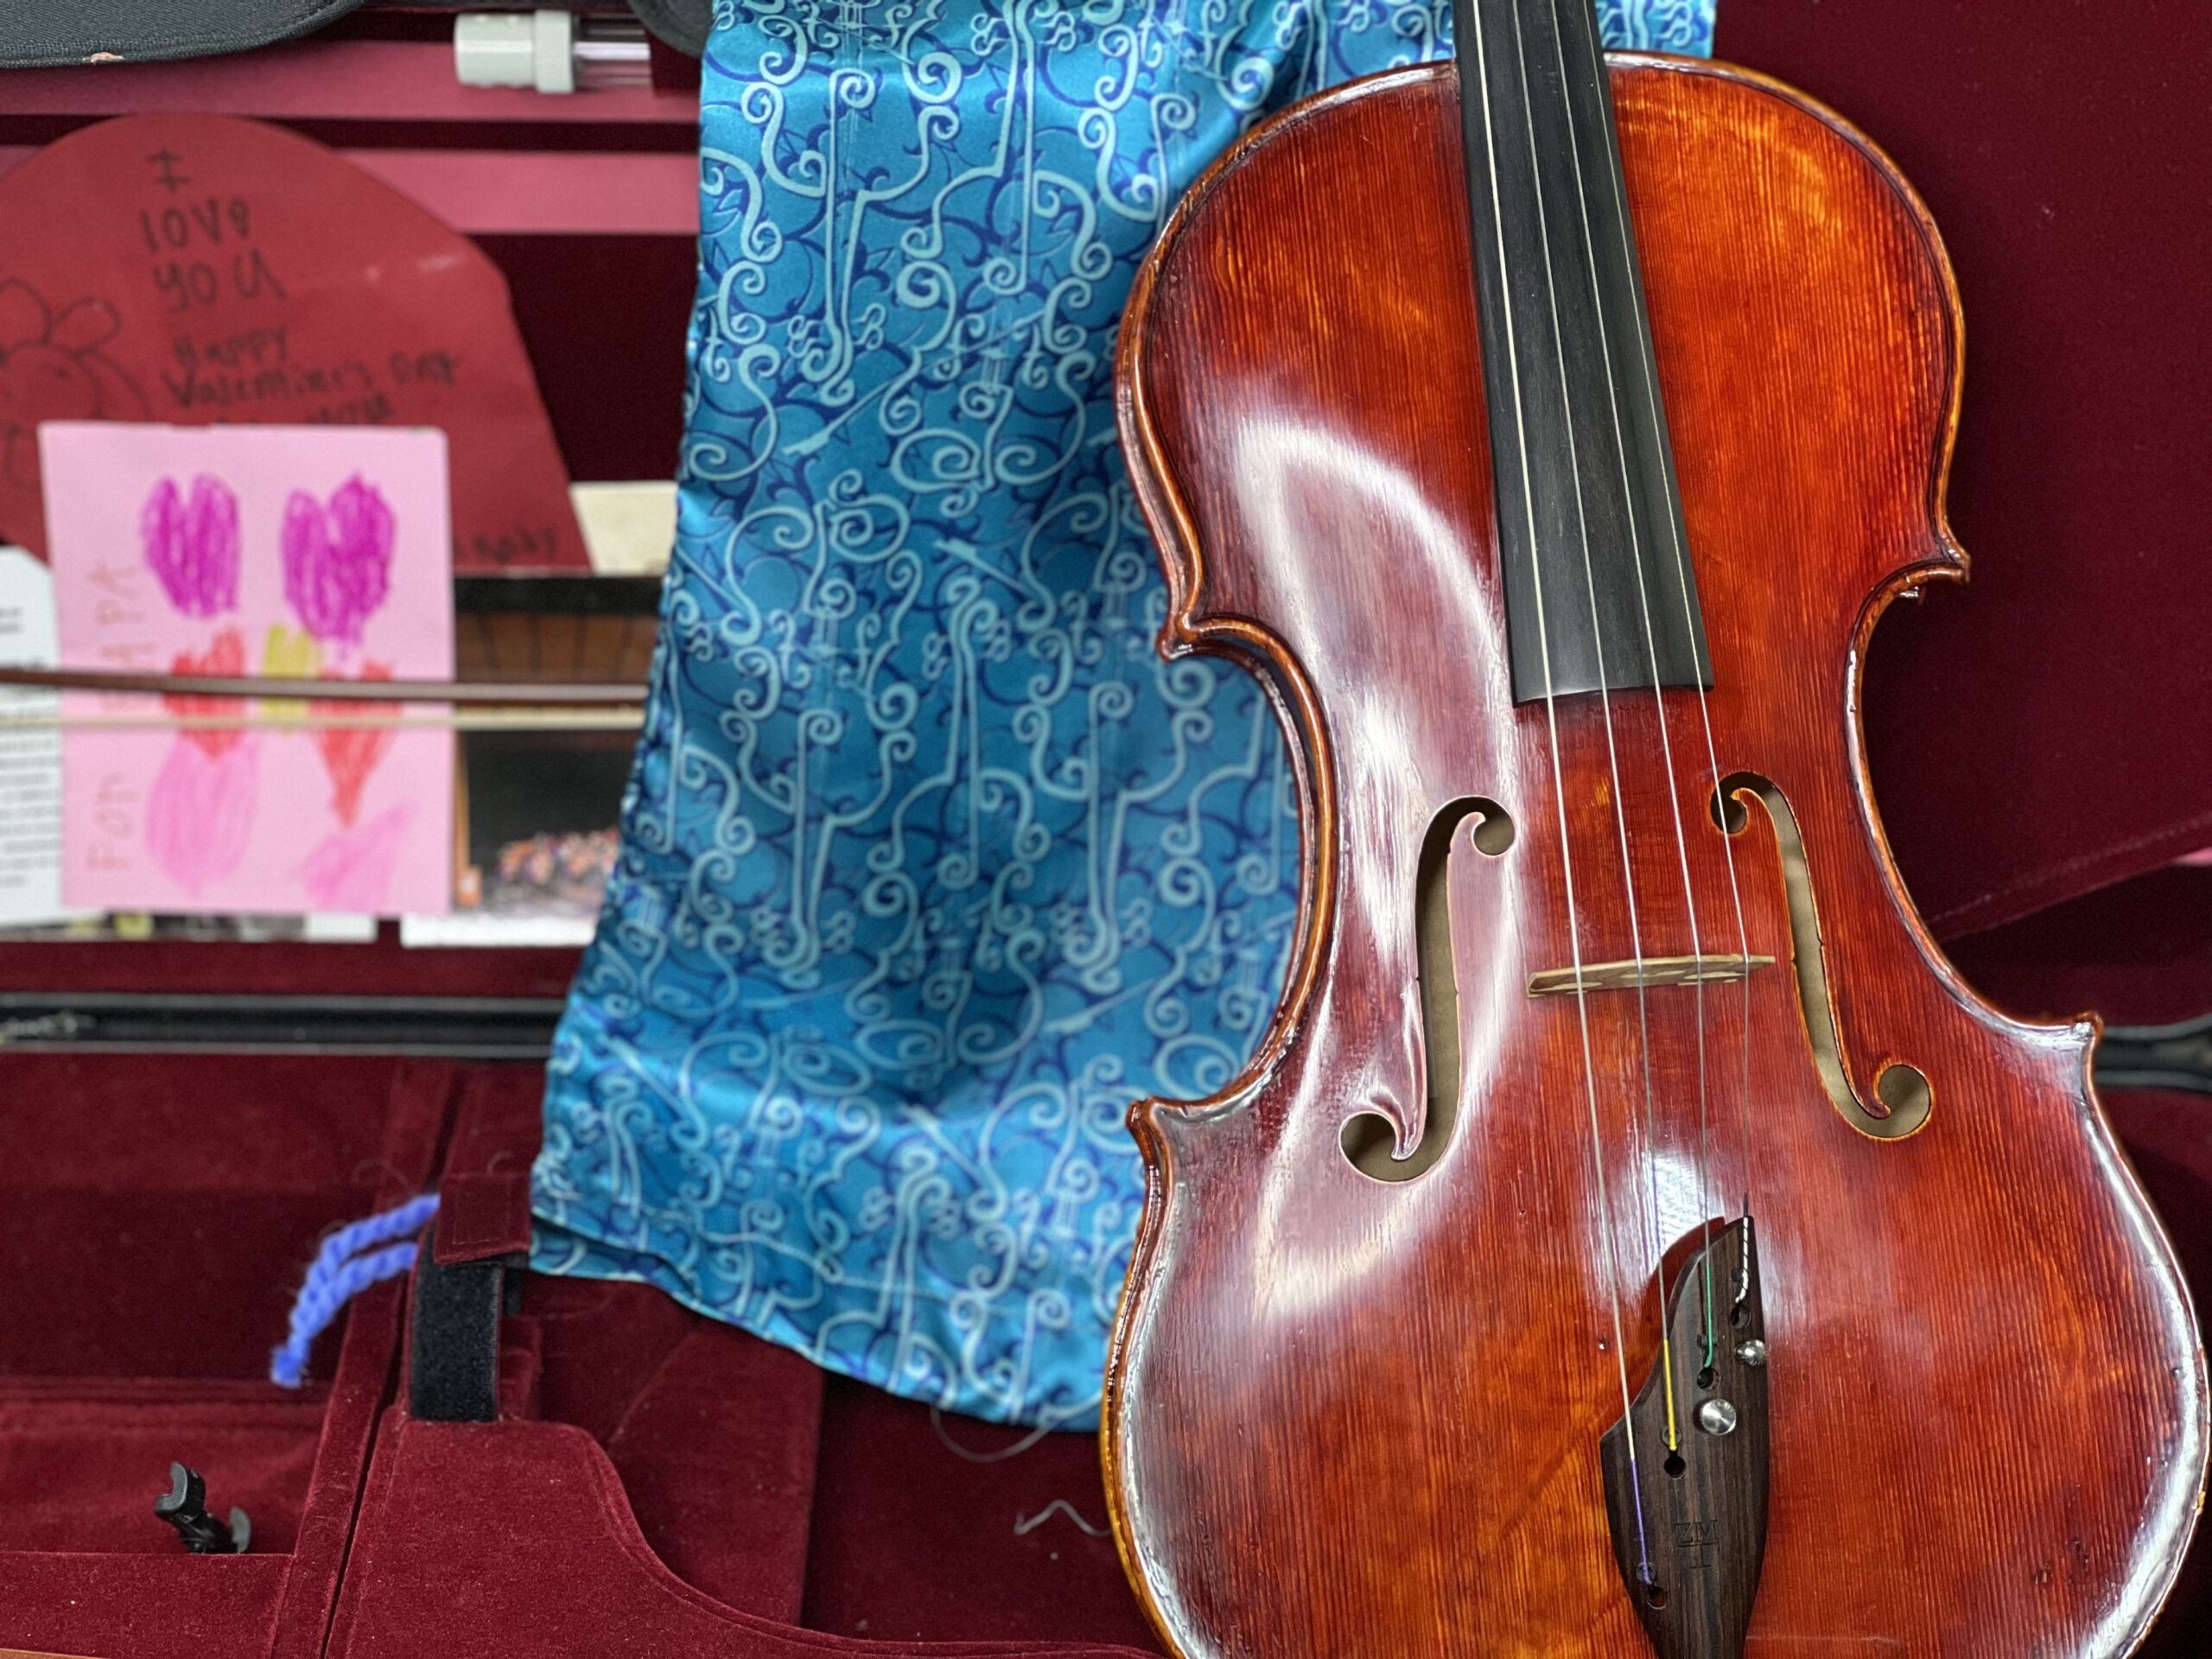 A cherry wood red viola and a blue drawstring storage bag